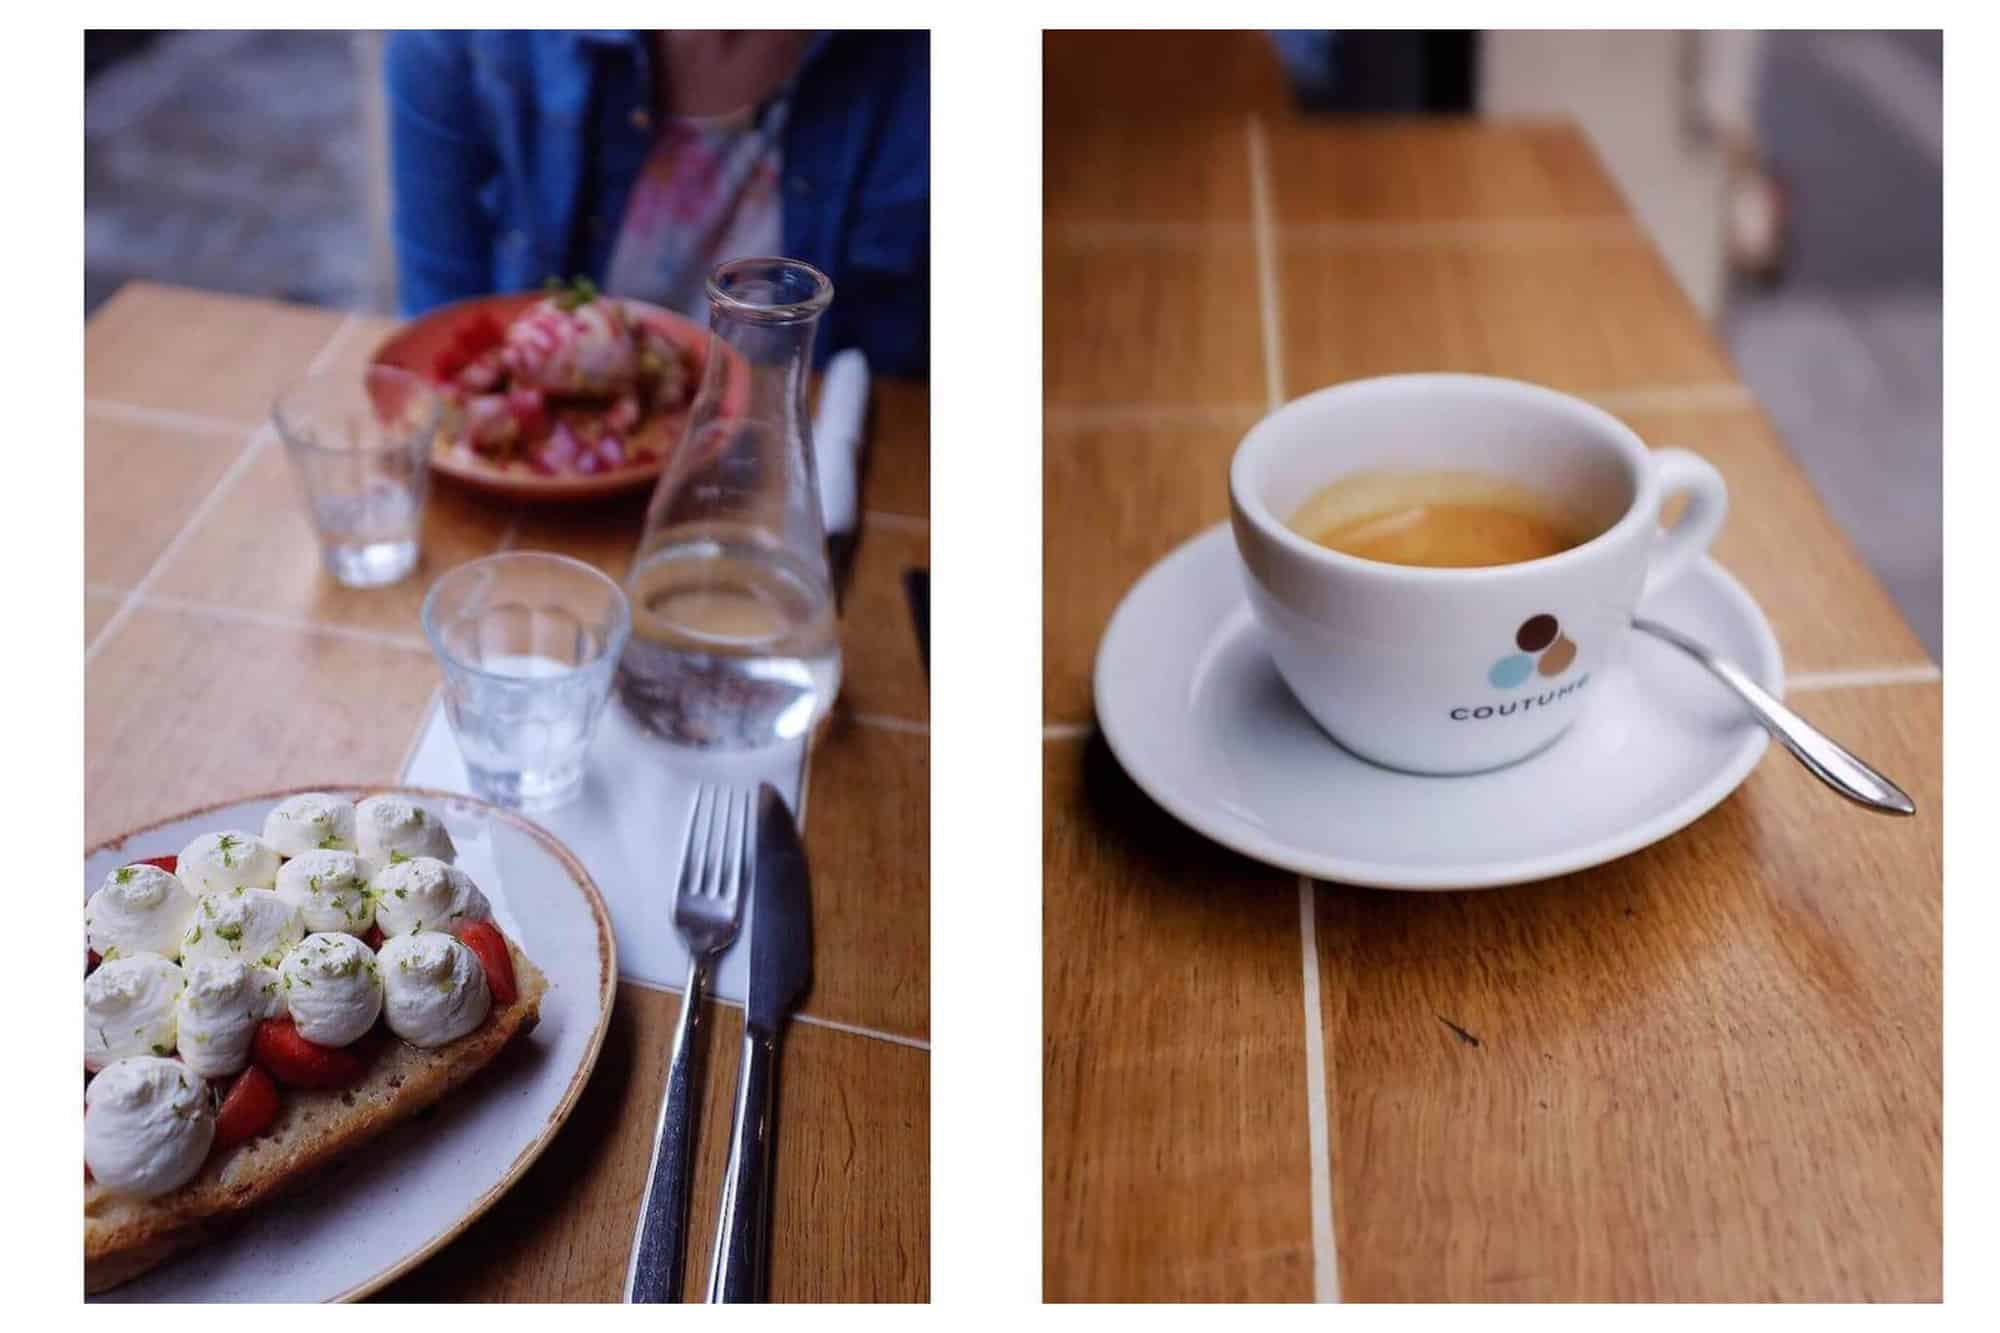 Left: A plate with a piece of bread with strawberries and cream on top. There is a glass bottle filled with water and two glasses, and another plate of food in front of a person in the background. Right: A white cup of coffee with "Coutume" written on it on white saucer.